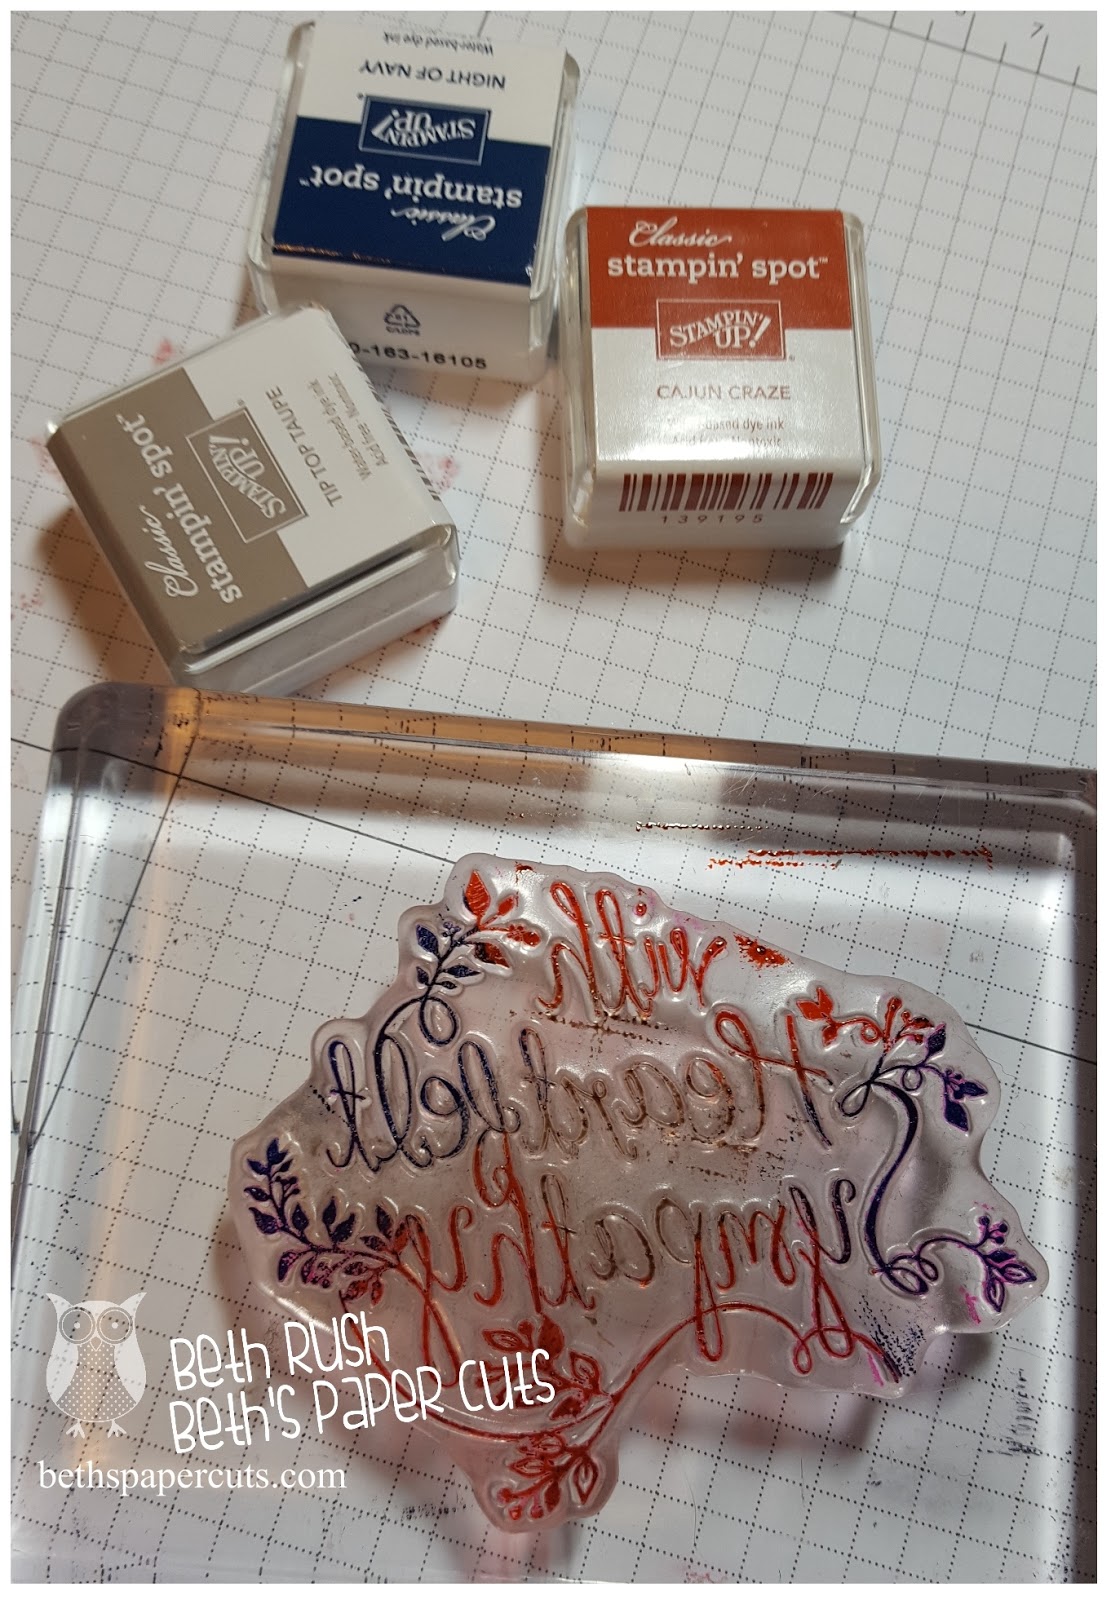 Beth's Paper Cuts: With Sympathy